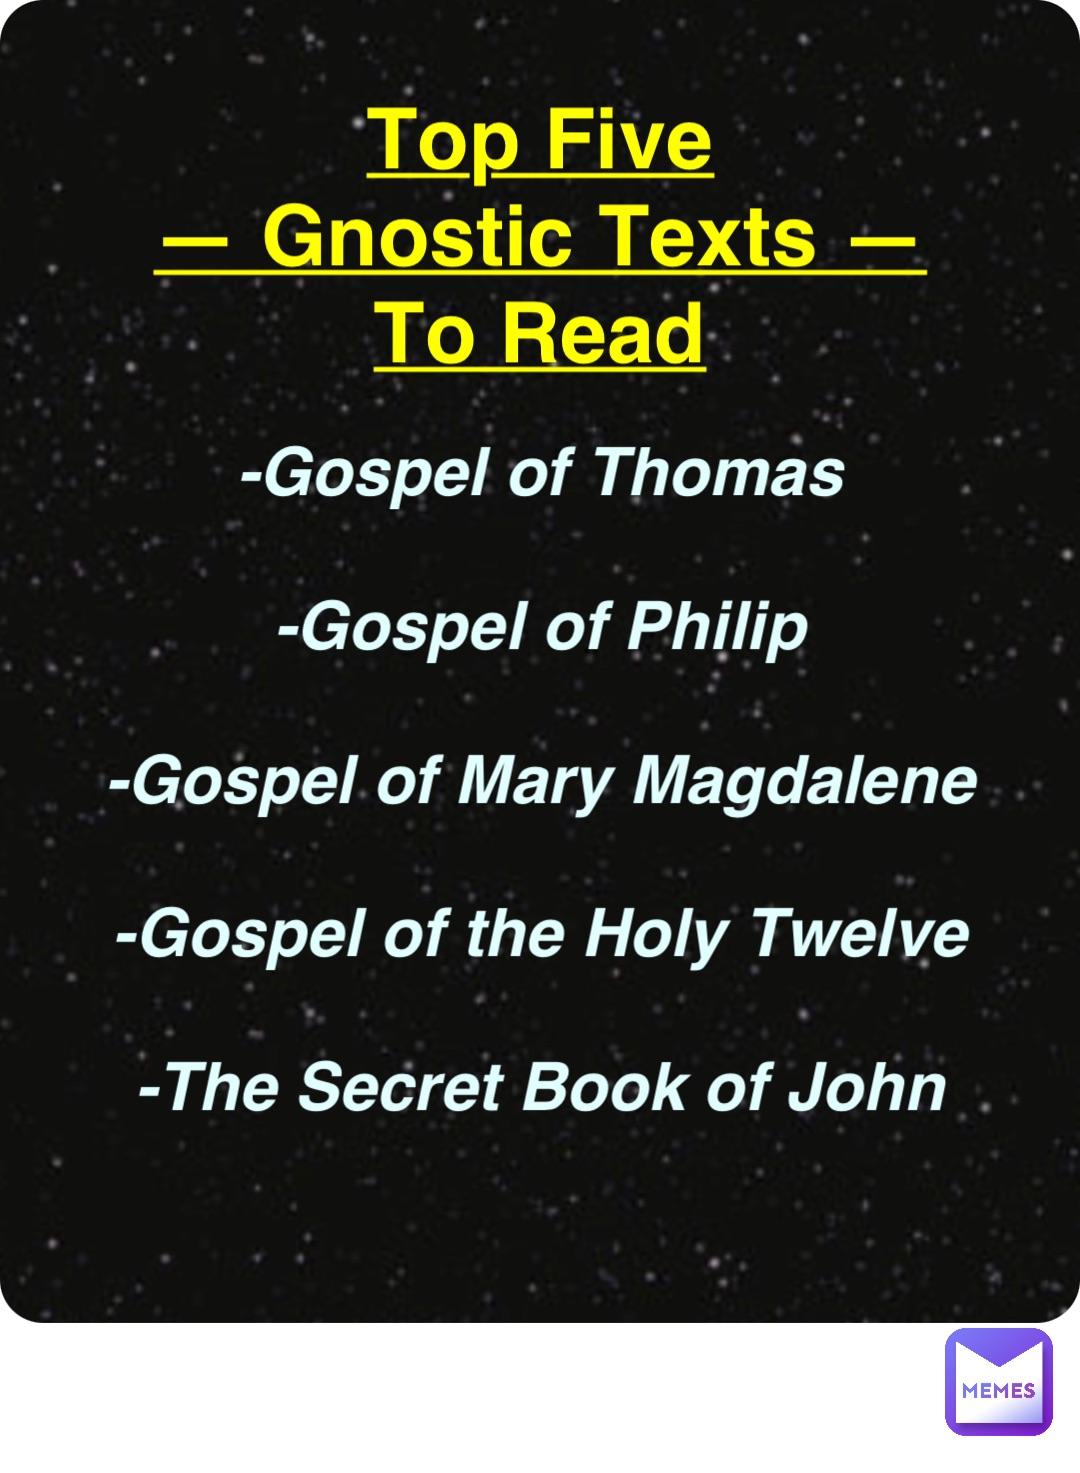 Double tap to edit Top Five
— Gnostic Texts —
To Read -Gospel of Thomas

-Gospel of Philip

-Gospel of Mary Magdalene

-Gospel of the Holy Twelve

-The Secret Book of John